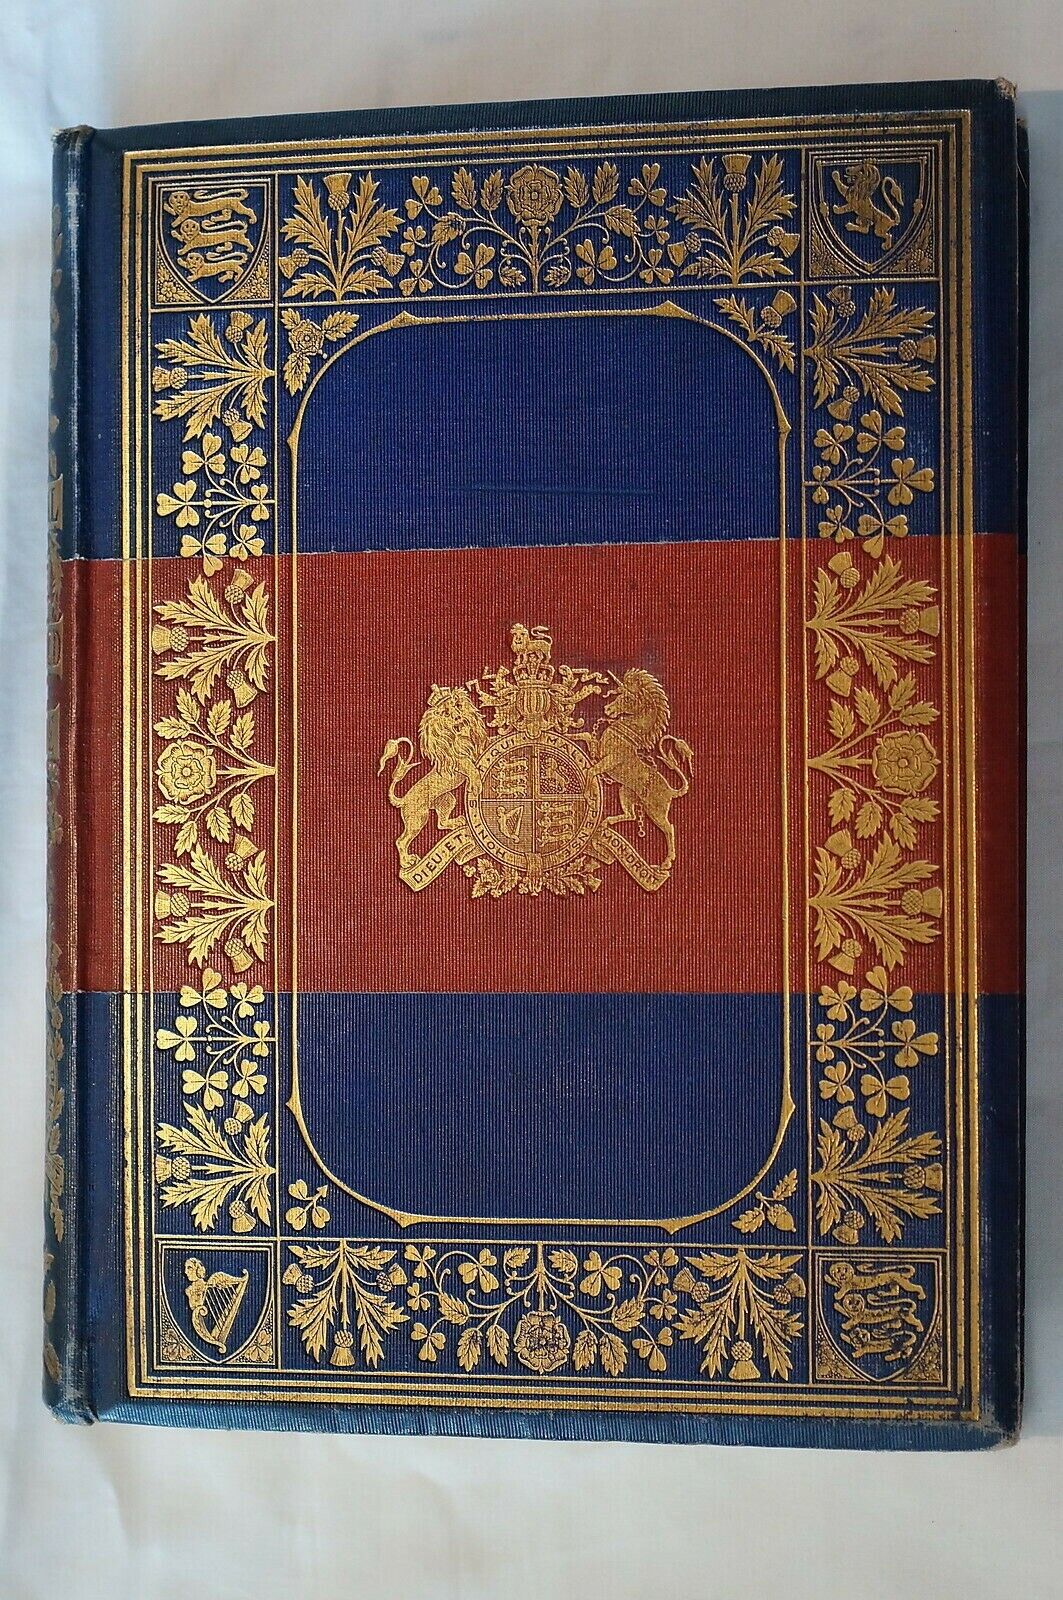 British The Jornal of The Household Brigade for the Year 1880 Reference Book